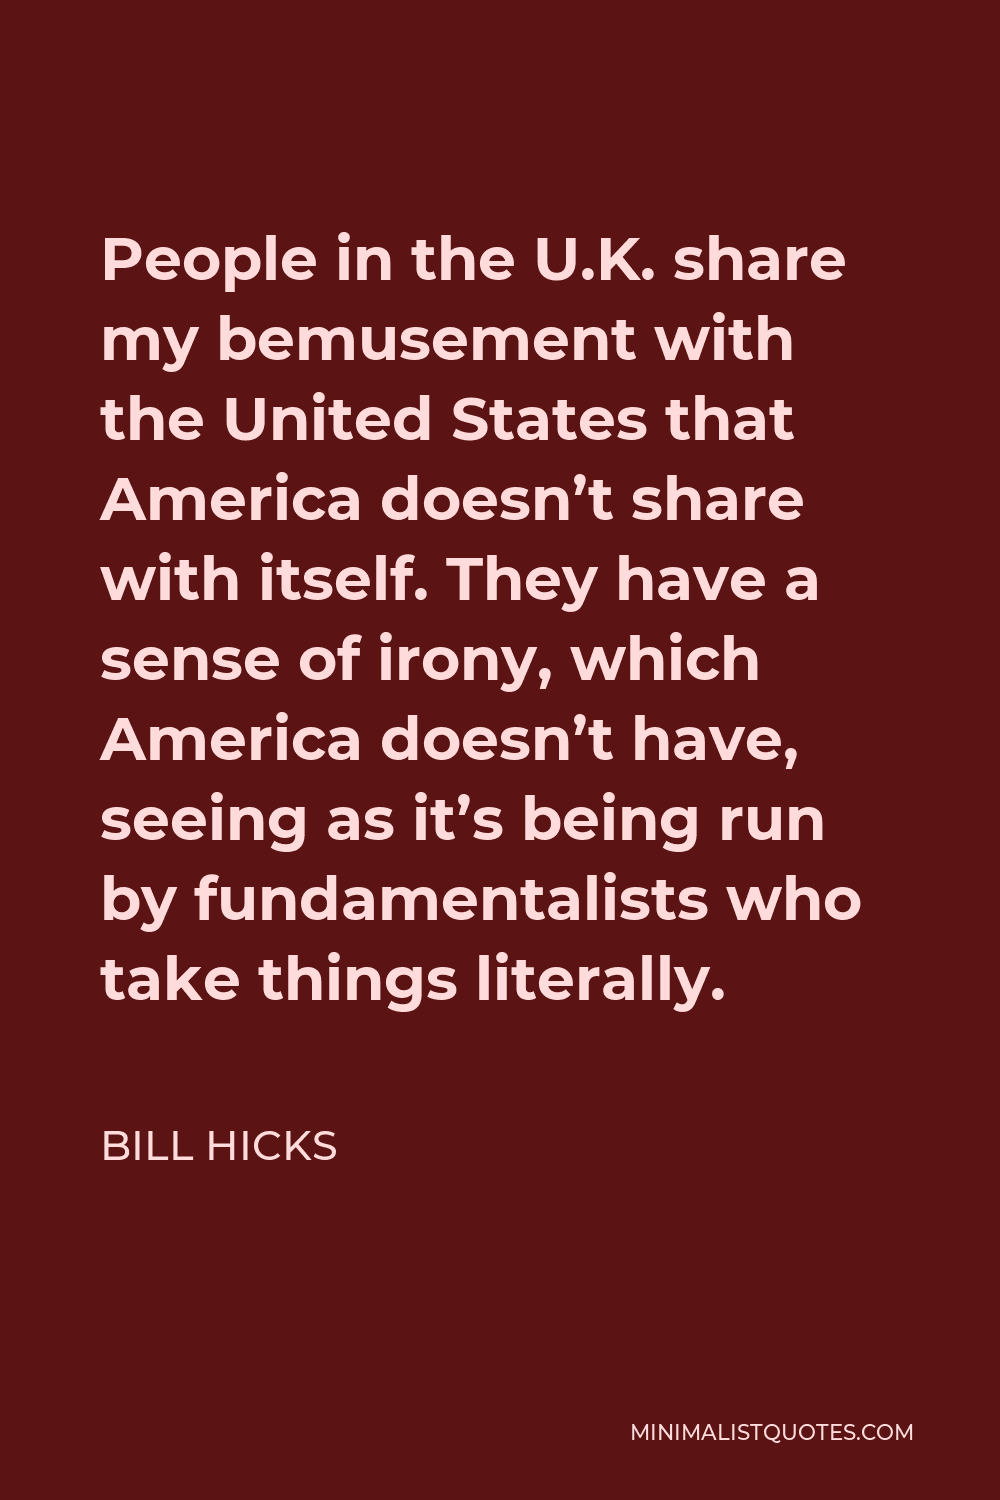 Bill Hicks Quote - People in the U.K. share my bemusement with the United States that America doesn’t share with itself. They have a sense of irony, which America doesn’t have, seeing as it’s being run by fundamentalists who take things literally.